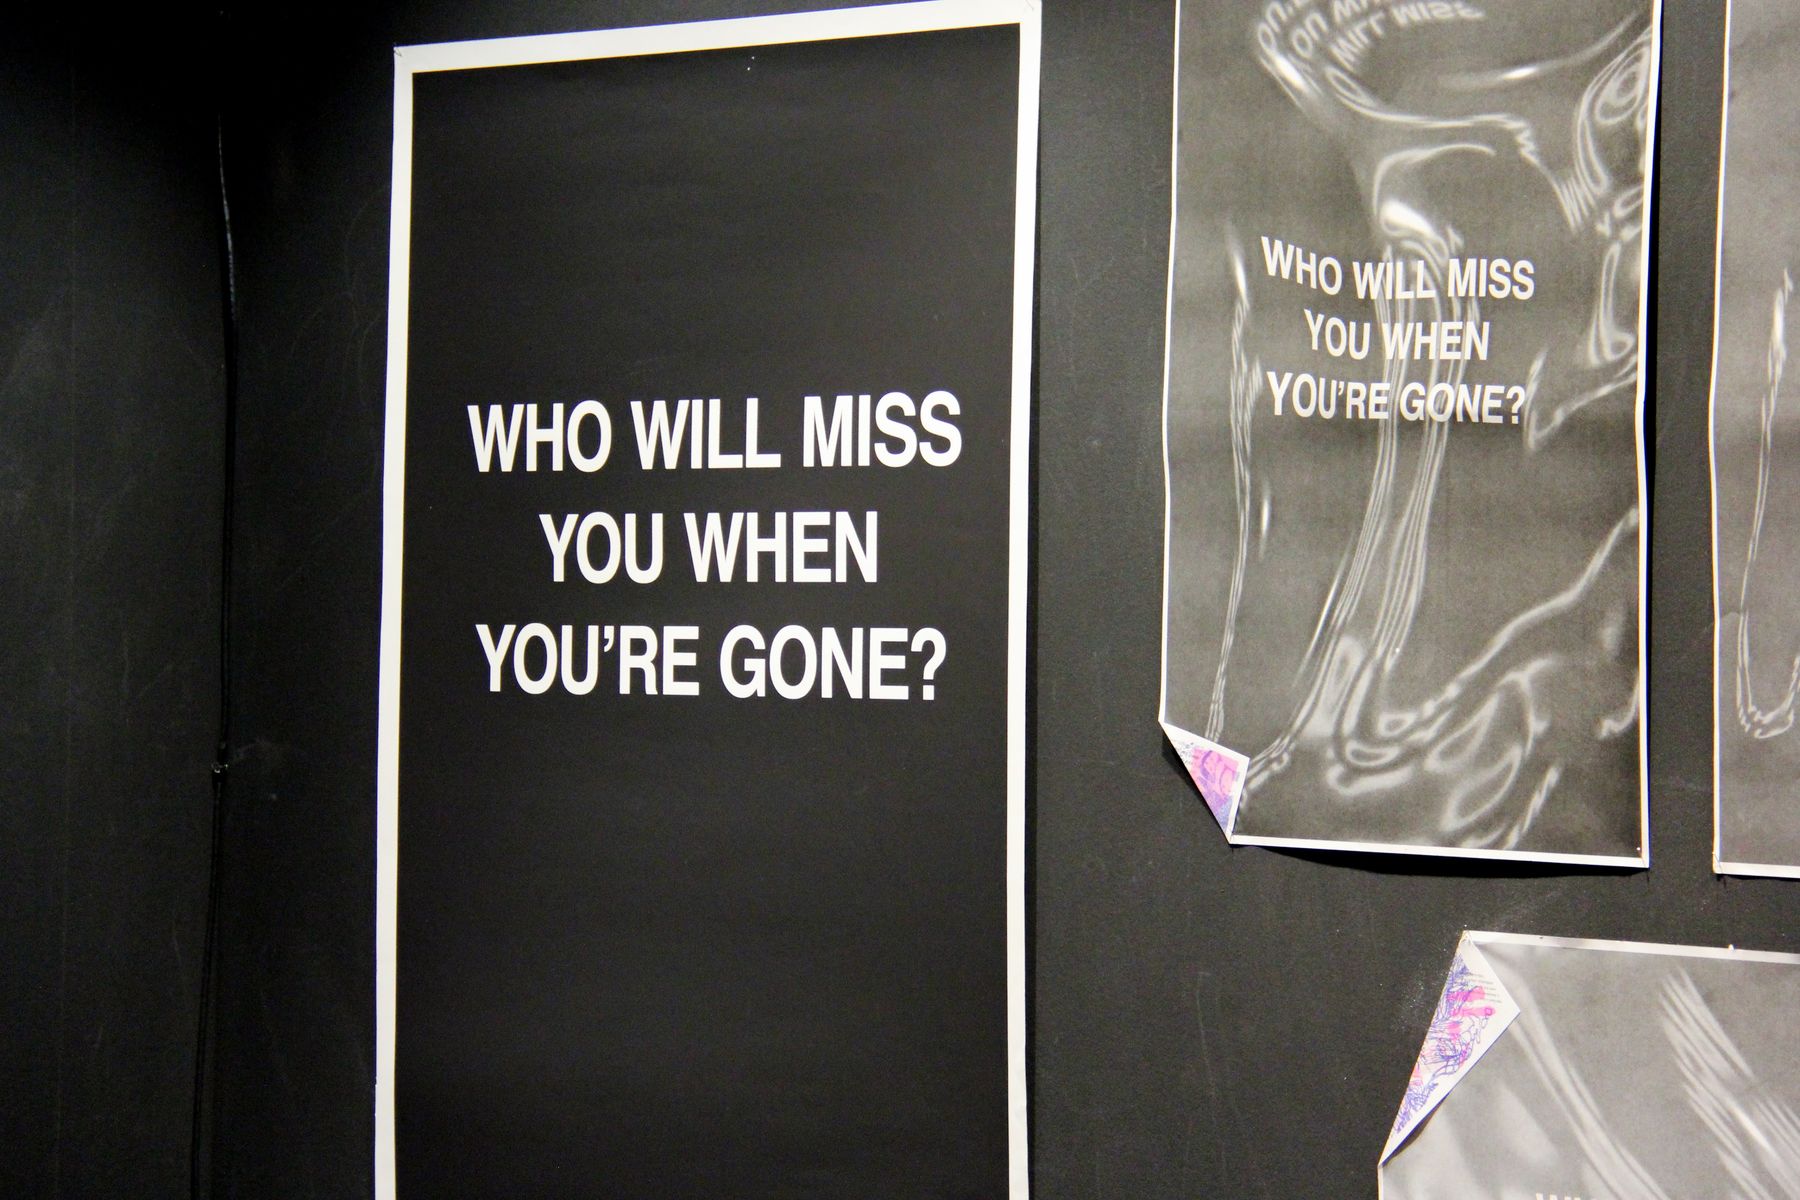 Who will miss you when you're gone?